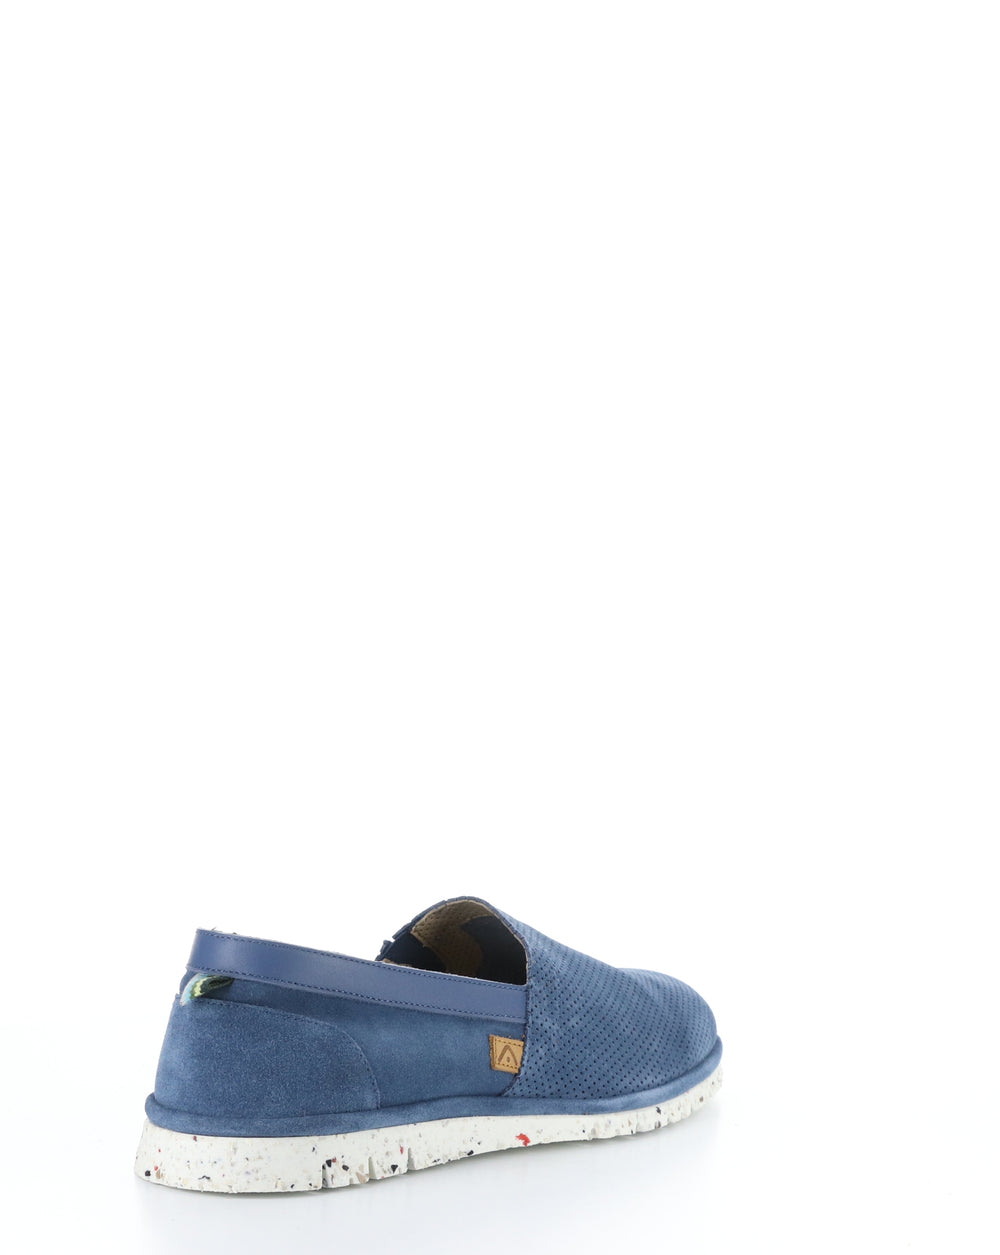 11162 JEANS Round Toe Shoes